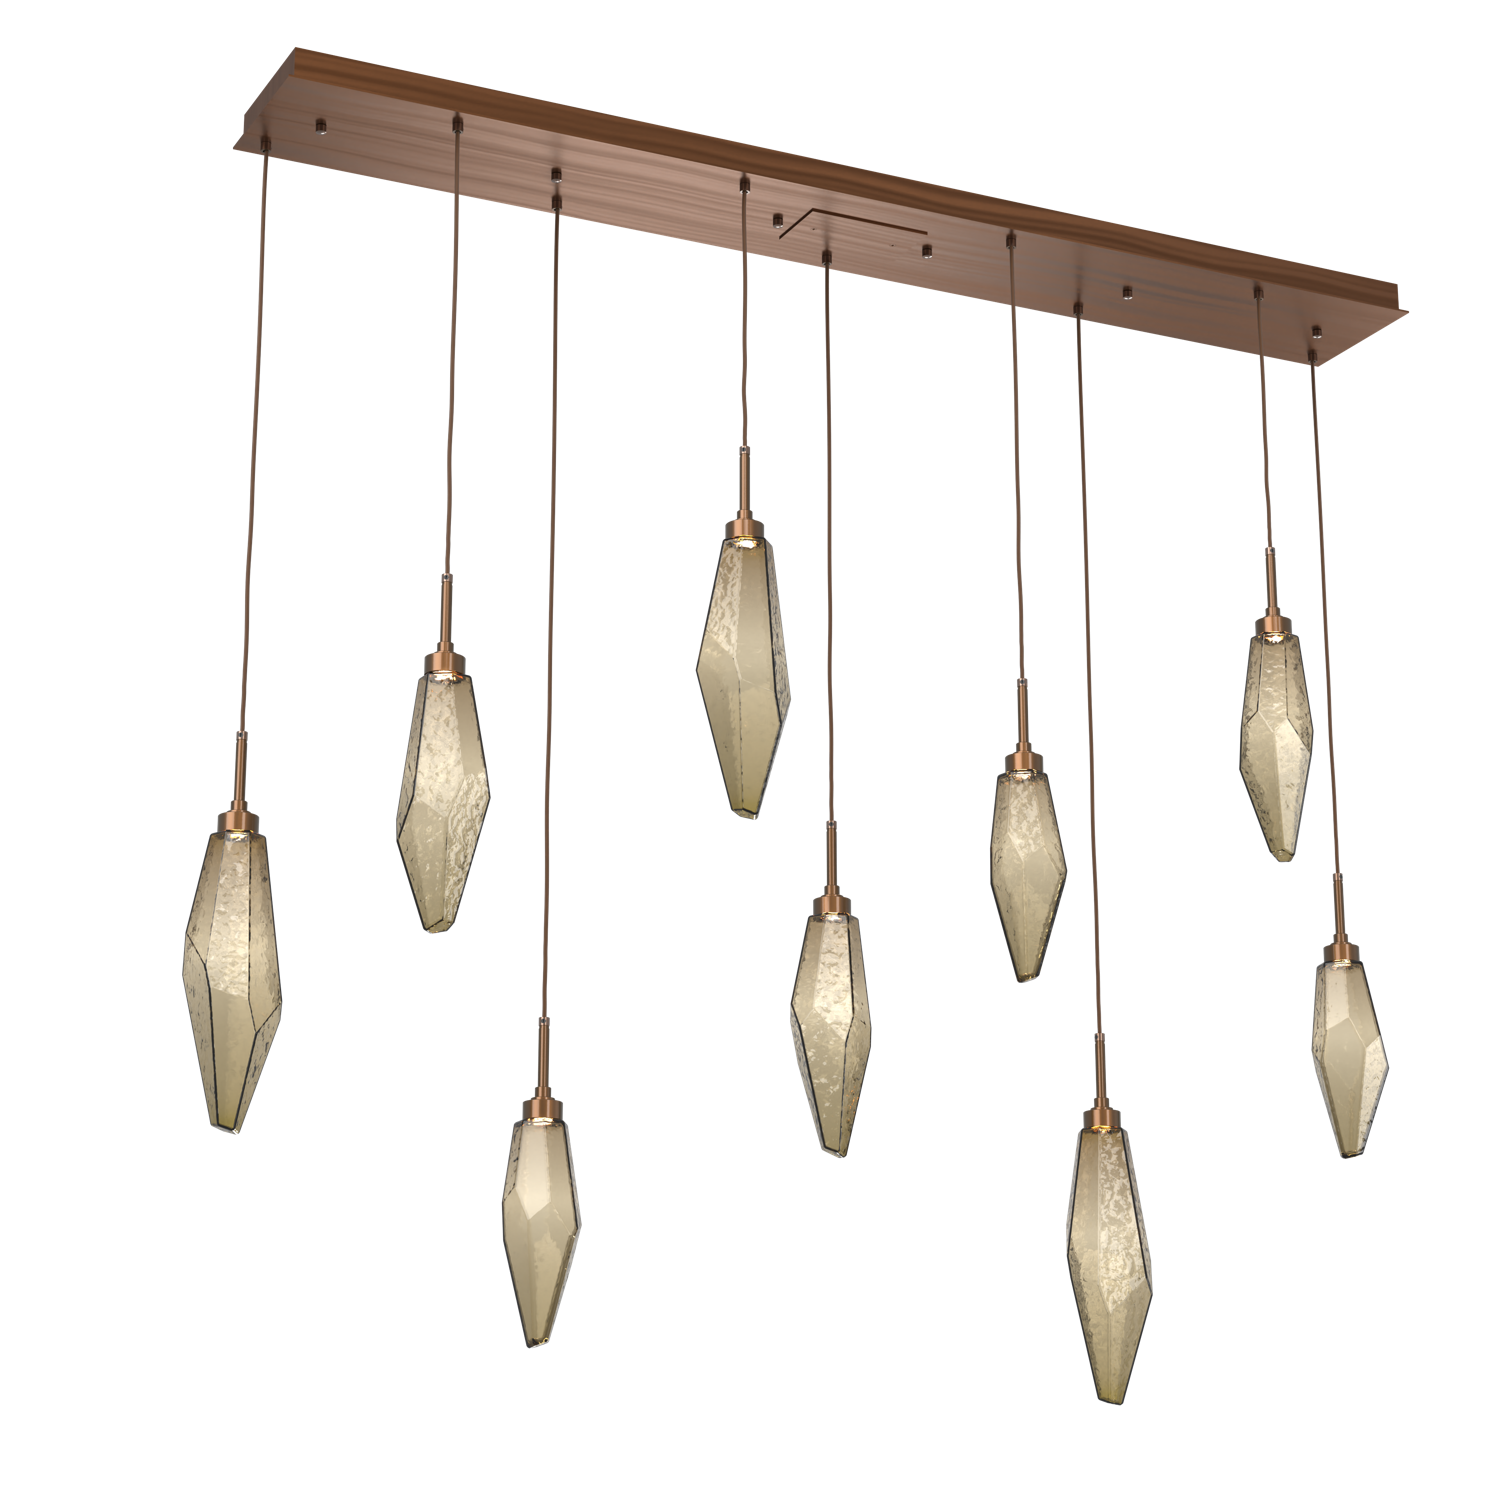 PLB0050-09-RB-CB-Hammerton-Studio-Rock-Crystal-9-light-linear-pendant-chandelier-with-oil-rubbed-bronze-finish-and-chilled-bronze-blown-glass-shades-and-LED-lamping